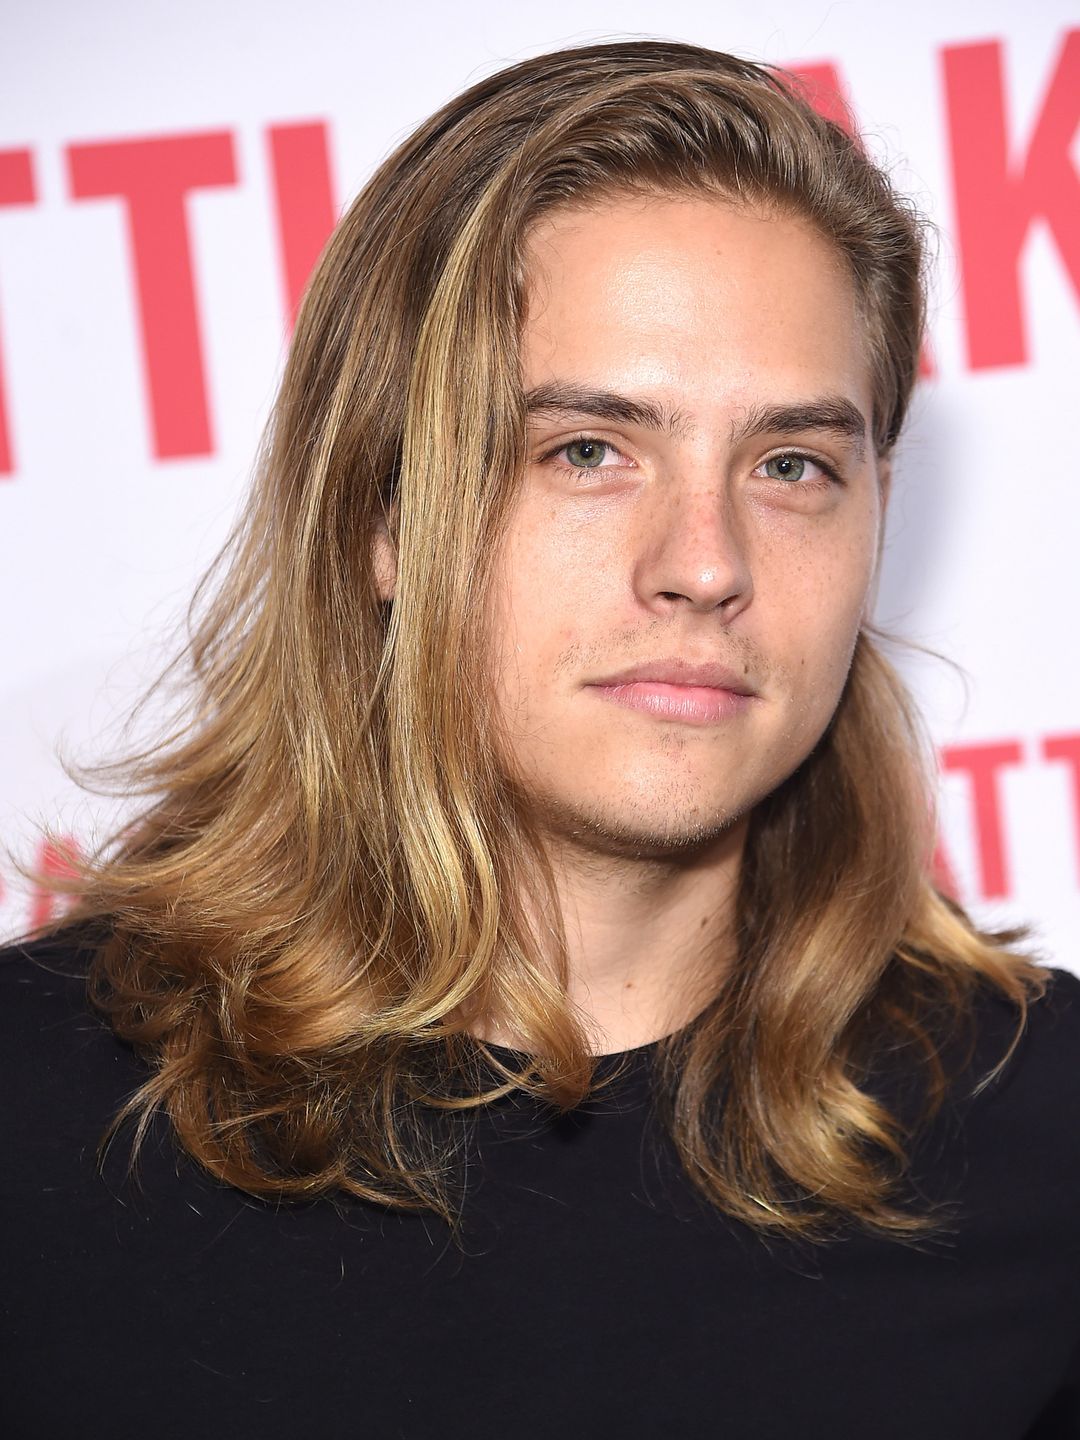 Dylan Sprouse height and weight